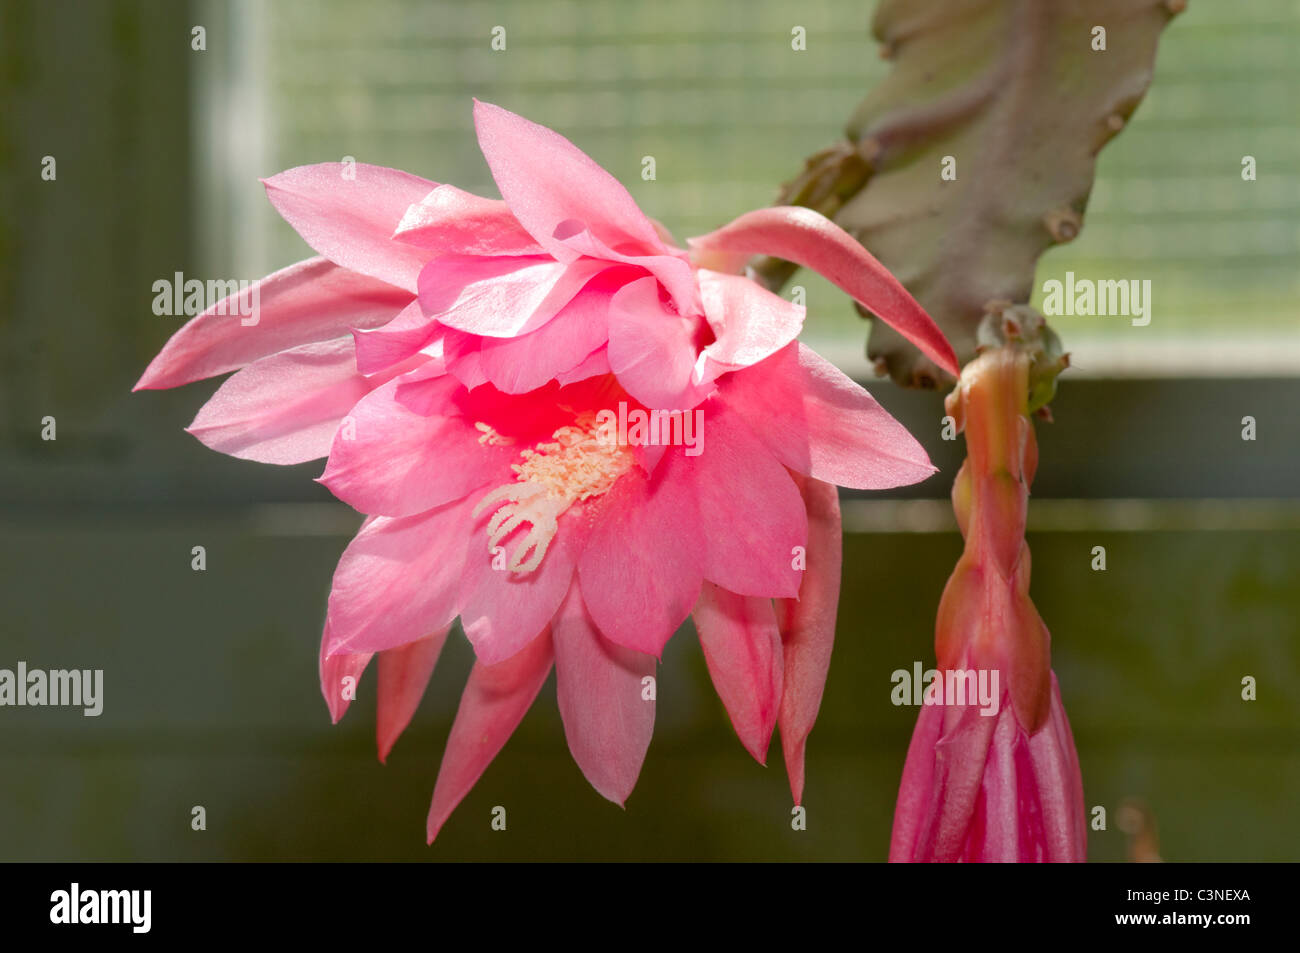 Large multi petaled bright pink cactus flower (Epiphyllum sp) with yellow stamens and a large white branched stigma, Stock Photo